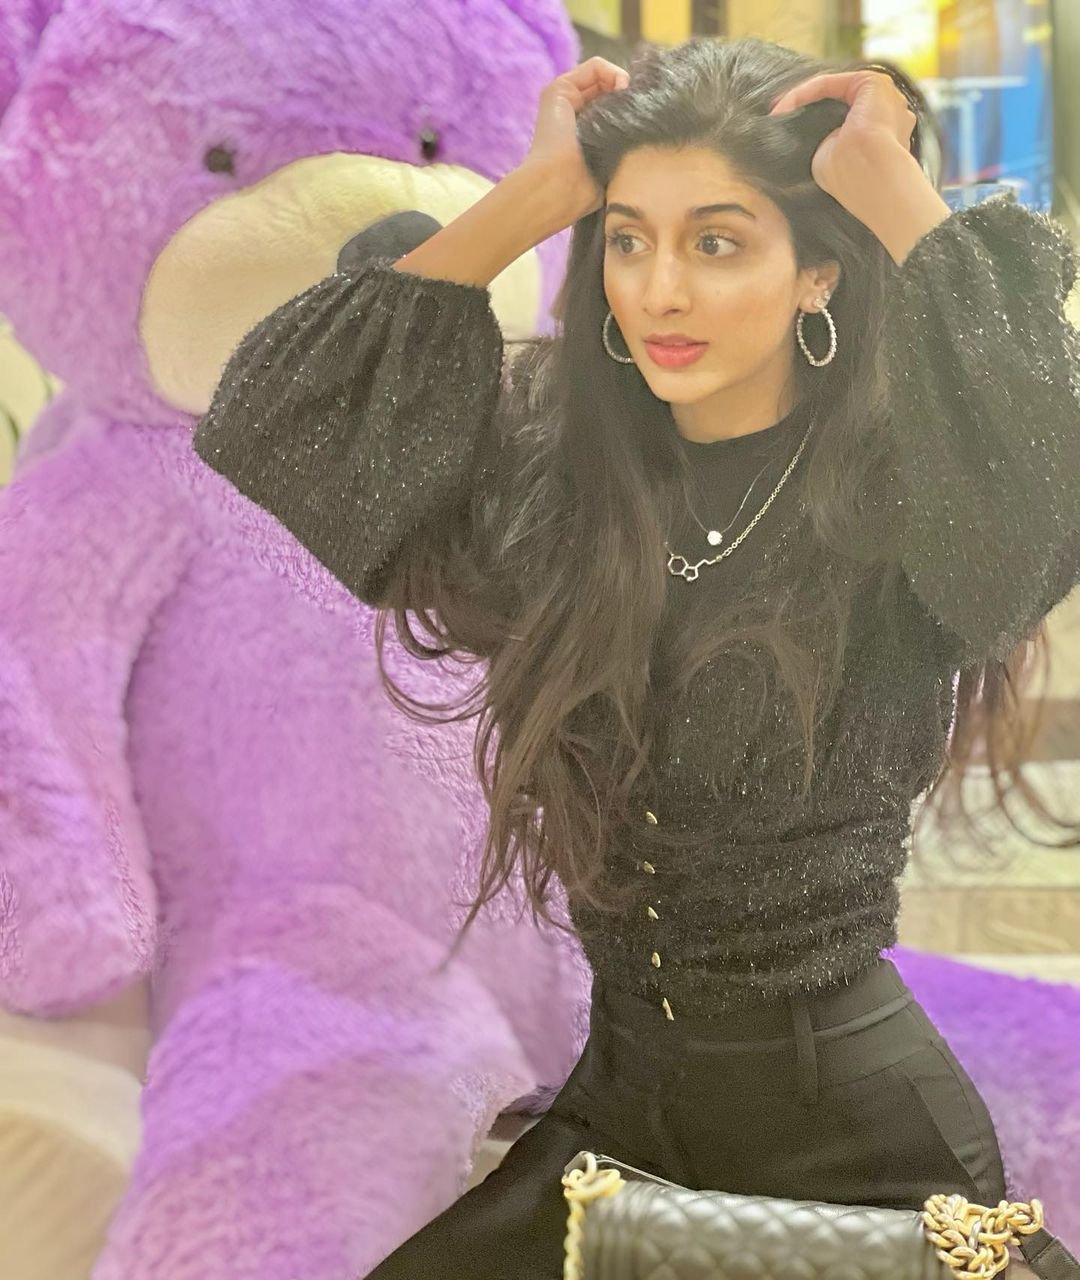 Mawra Hocane wishes Happy New Year to her fans